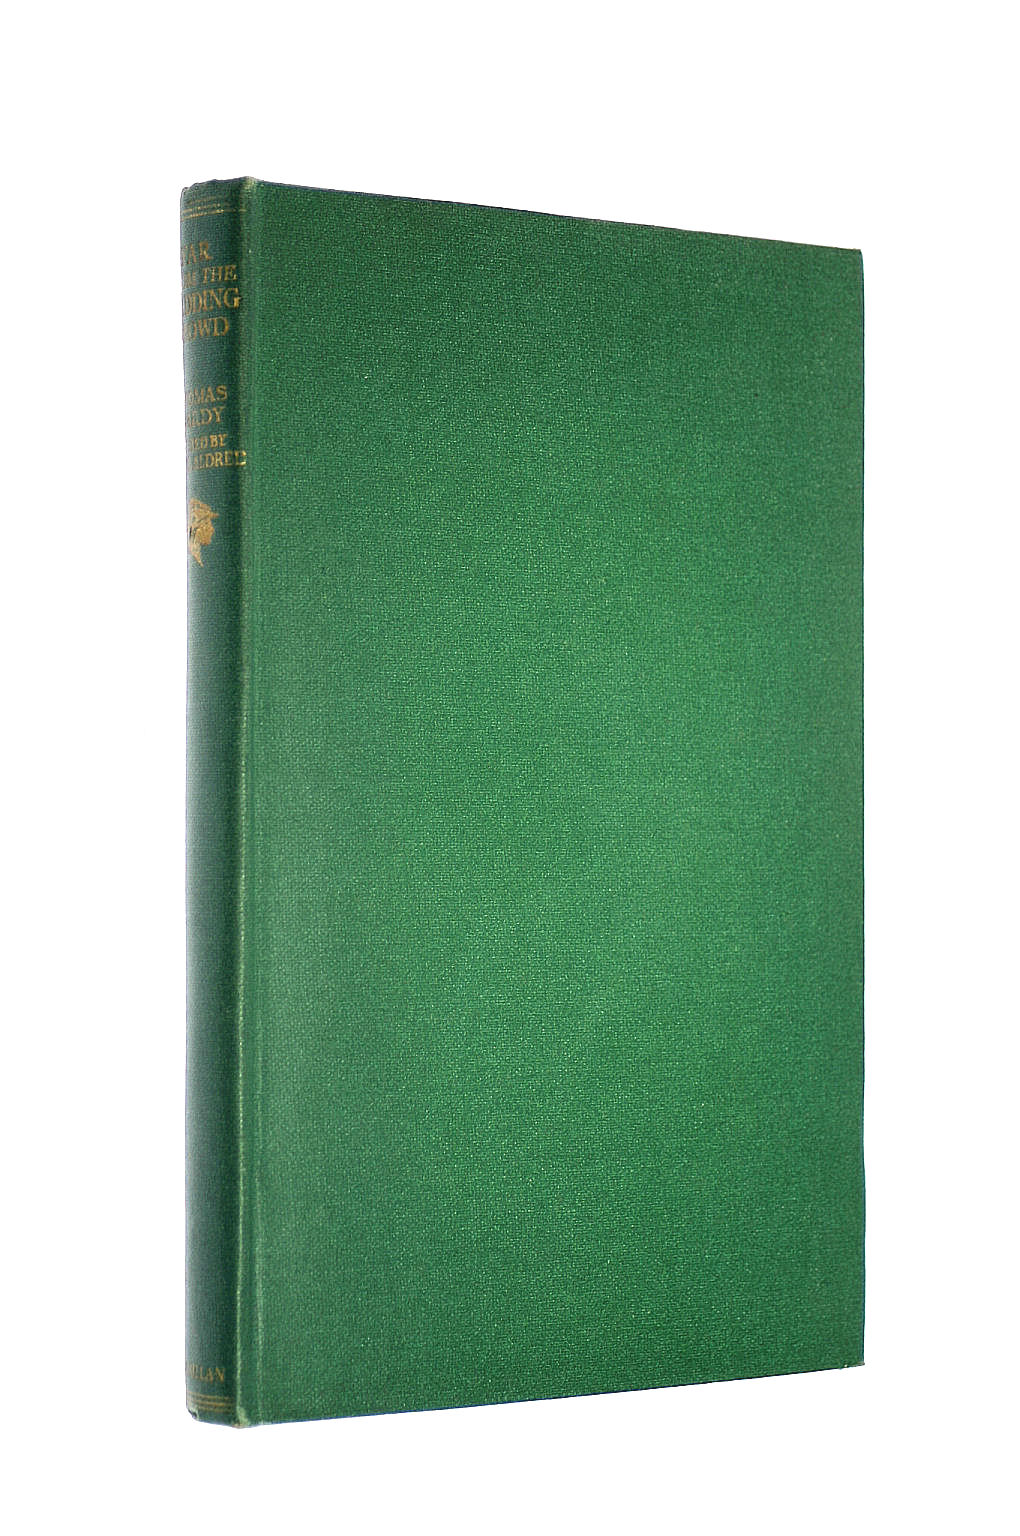 THOMAS HARDY; CYRIL ALDRED [EDITOR] - Far From the Madding Crowd - Edited with Introduction and Notes by Cyril Aldred